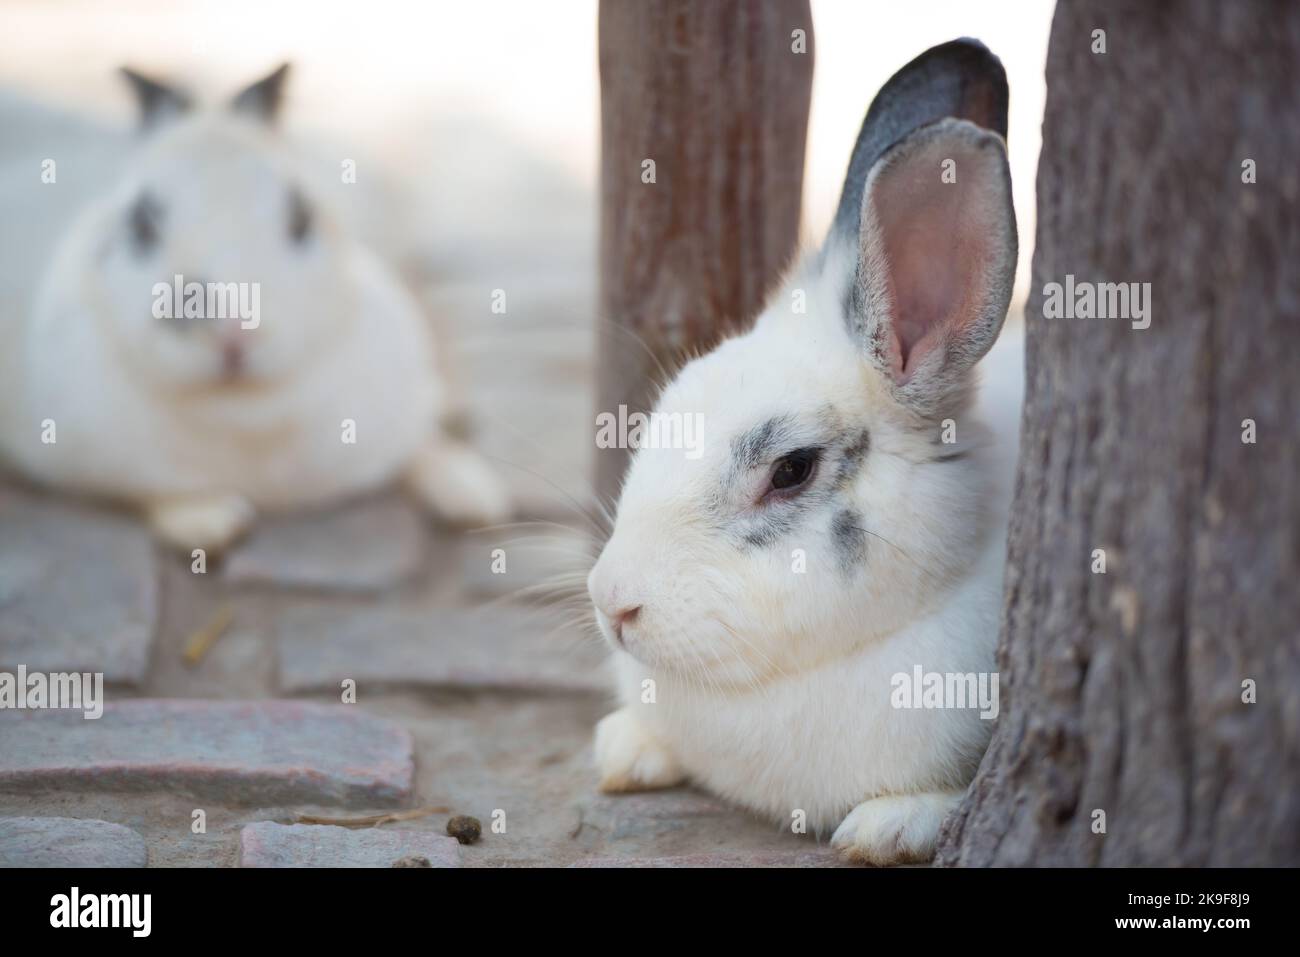 Rabbit resting on the ground. Home decorative rabbit outdoors. Little bunny, Year of the Rabbit Zodiac, Easter bunny. Stock Photo